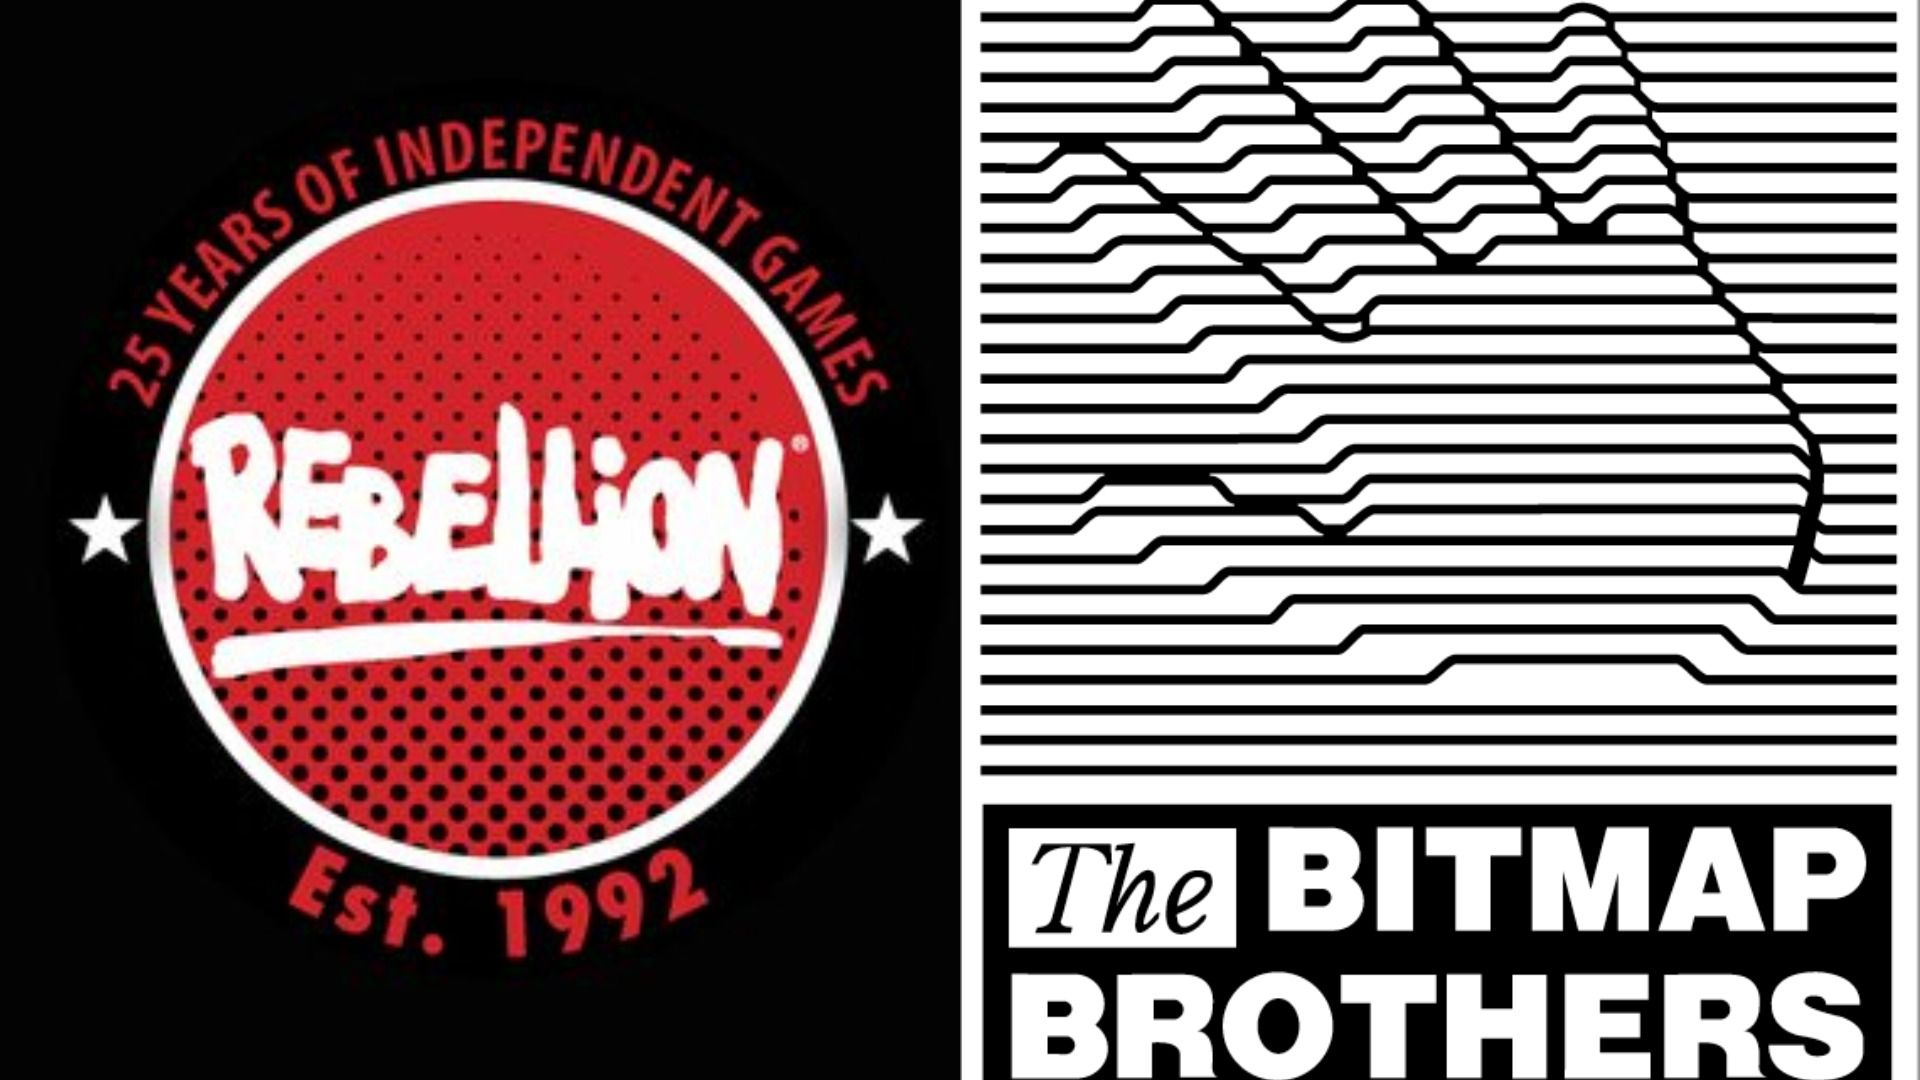 Rebellion Acquires The Bitmap Brothers Brand and IPs, Will Revive Xenon ...